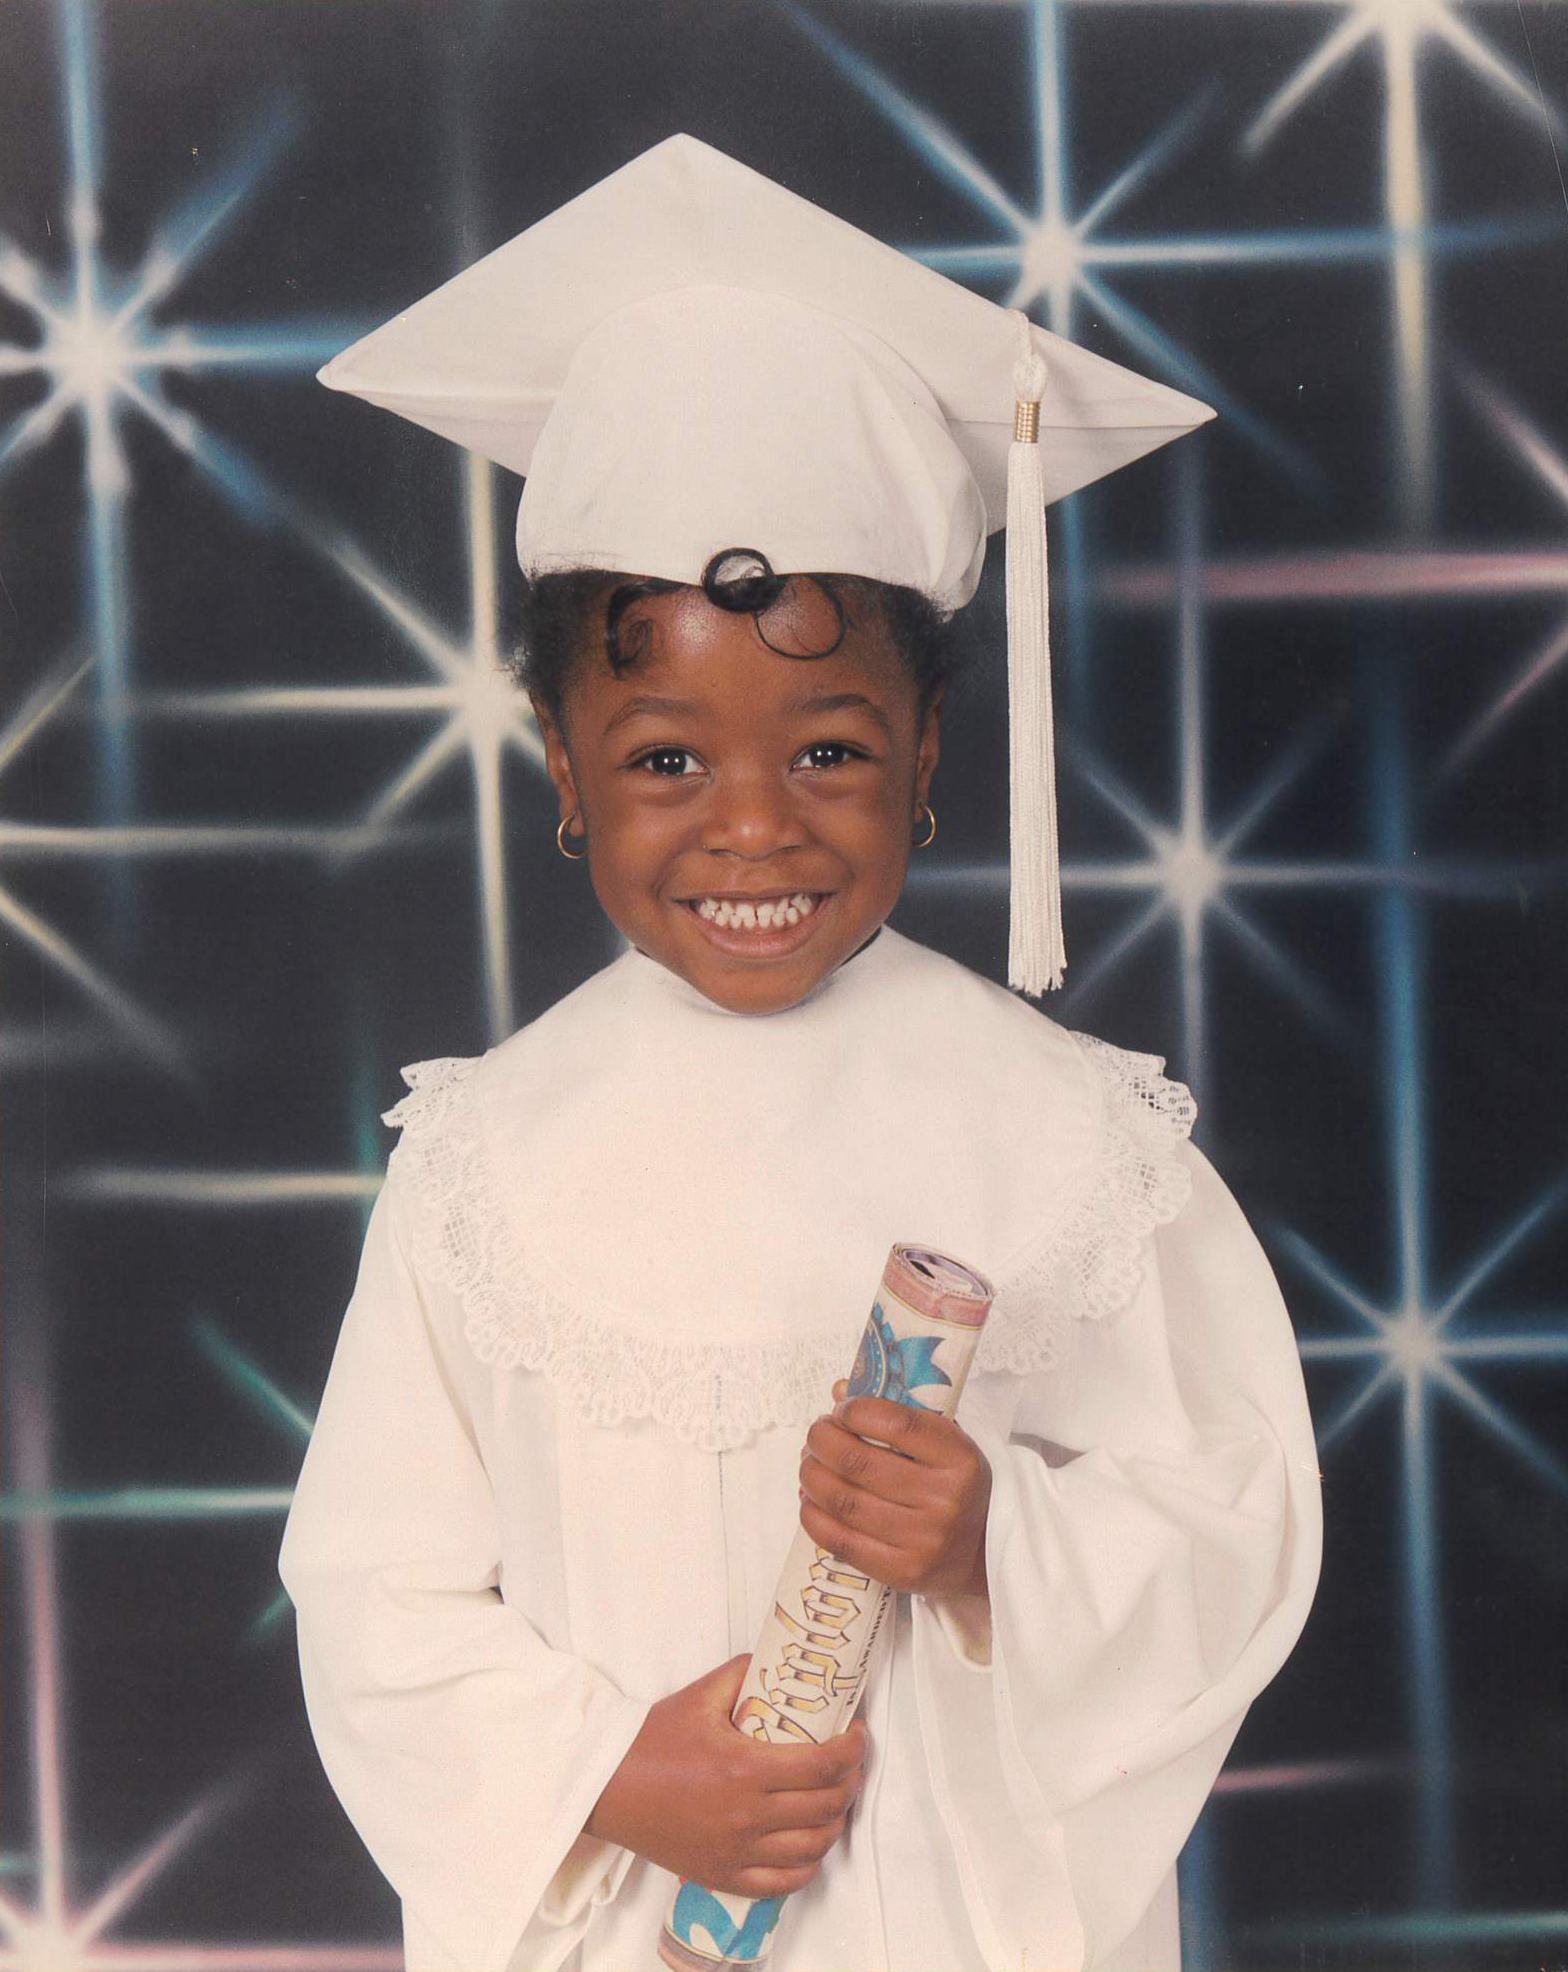 Tyra, 4 years old, at her graduation from Lane Head Start Center in Lane, South Carolina.  